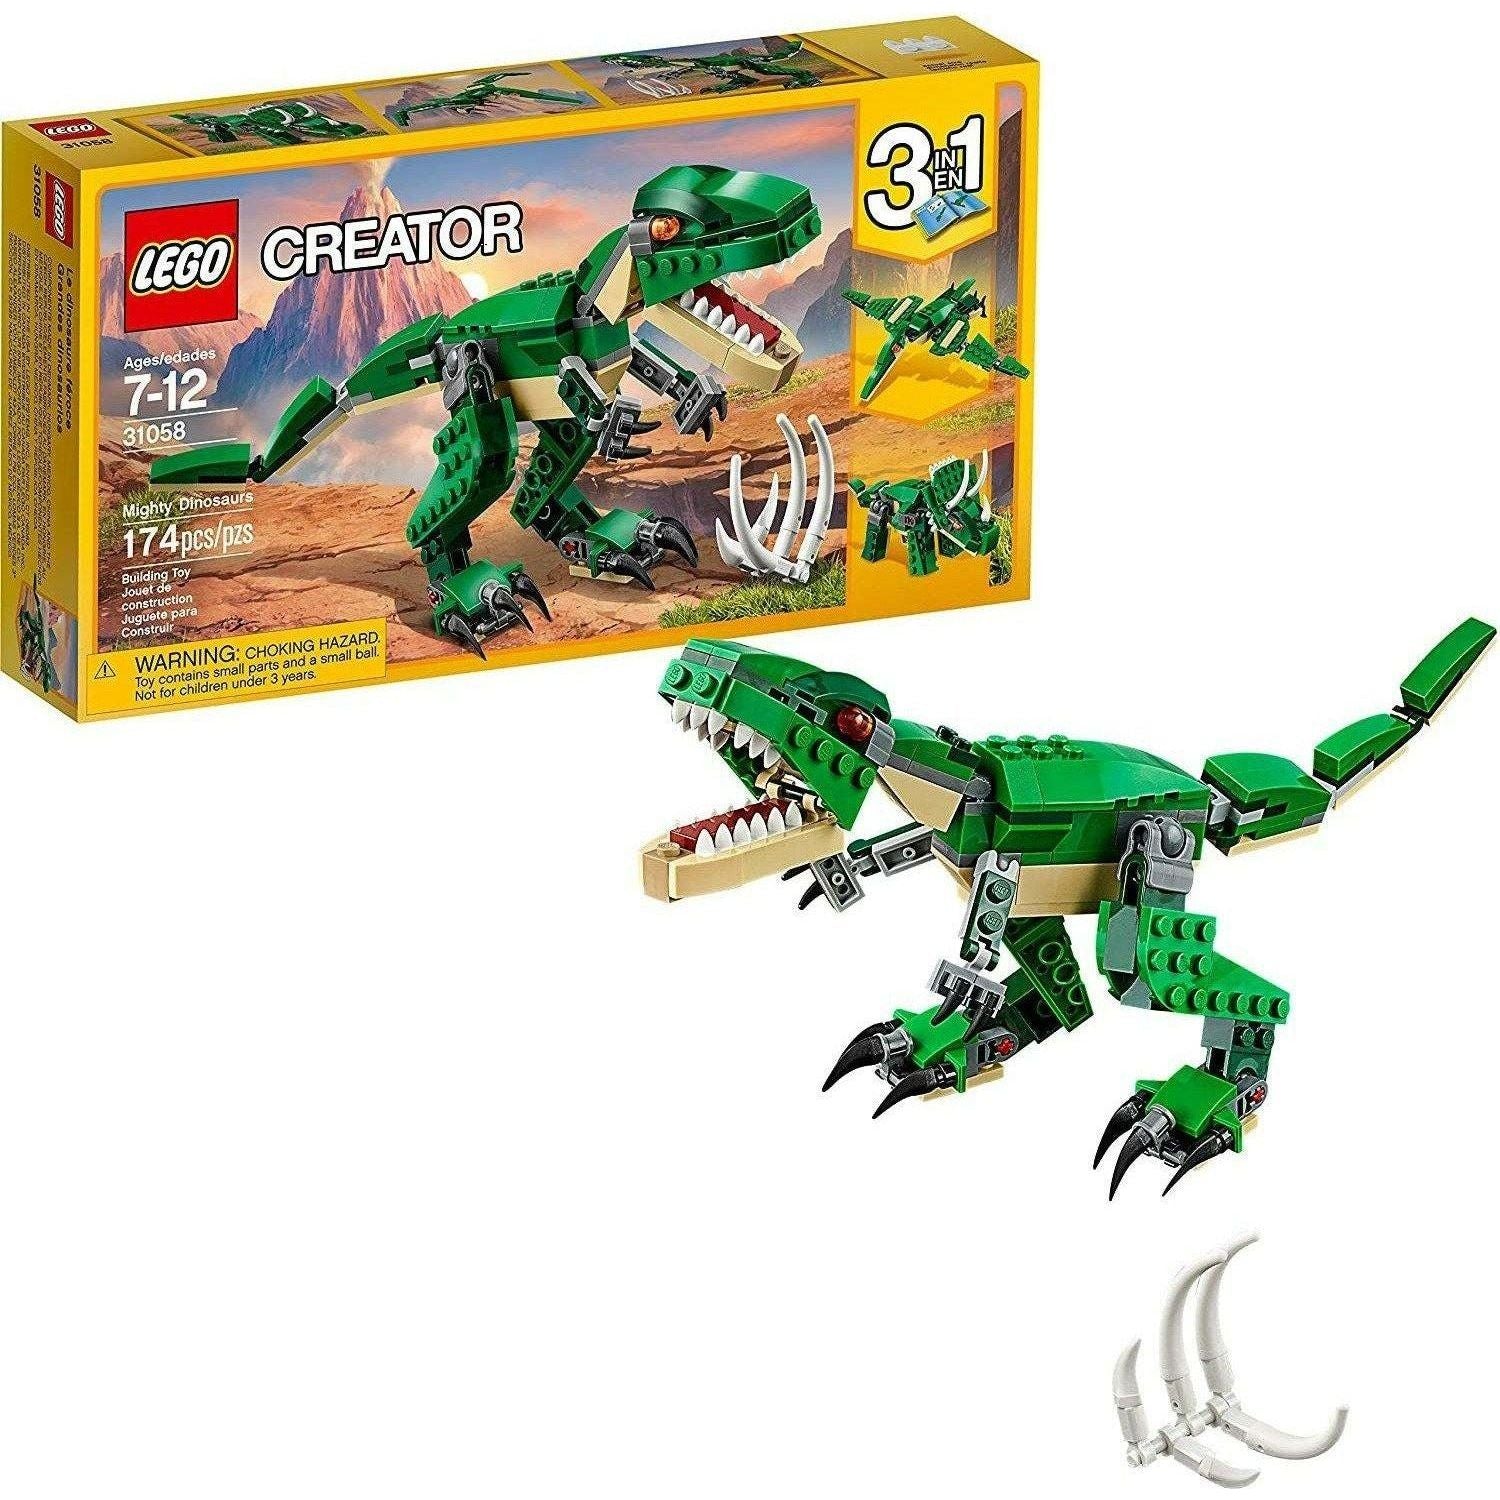 LEGO Creator 3 in 1 31058 Mighty Dinosaurs Build It Yourself Dinosaur Set (174 Pieces) - BumbleToys - 5-7 Years, Boys, Creator, Creator 3In1, Dinosaur, LEGO, OXE, Pre-Order